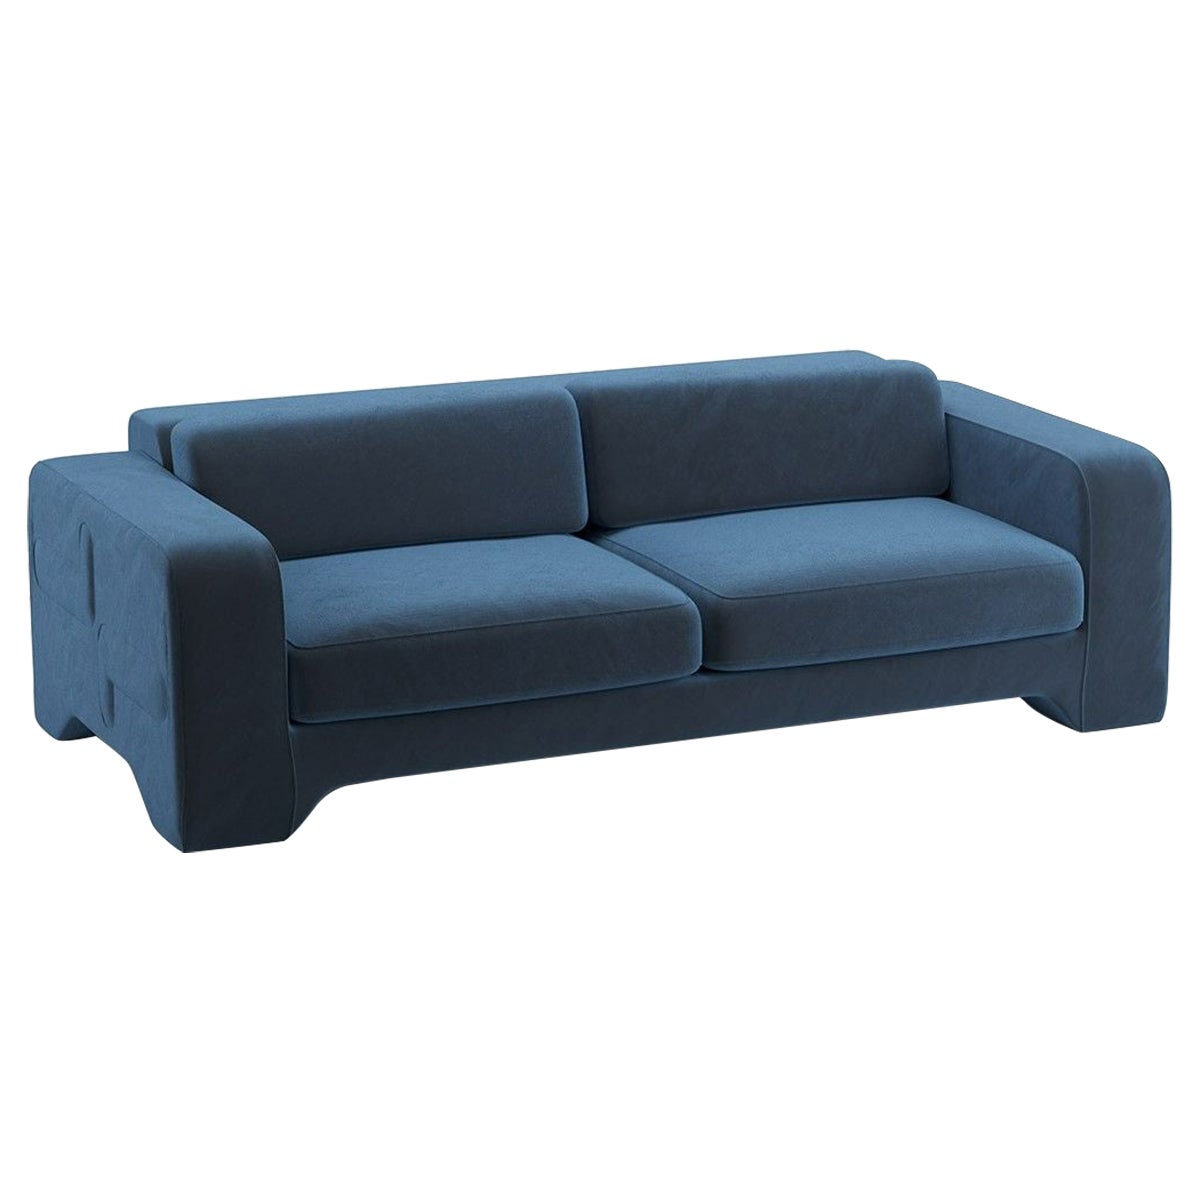 Popus Editions Giovanna 3 Seater Sofa in Blue Como Velvet Upholstery